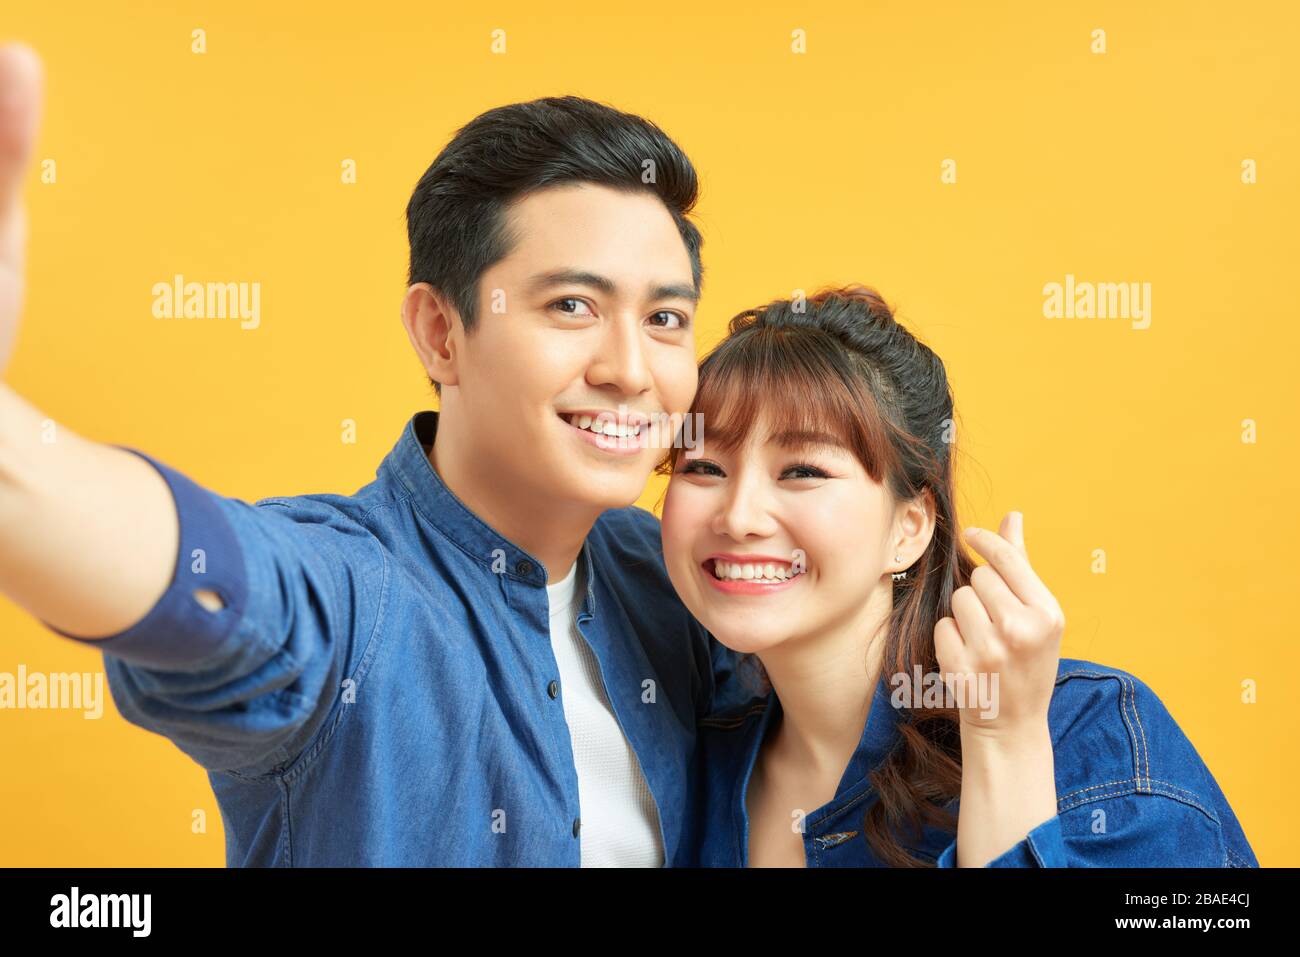 Self portrait of funny foolish cheerful adorable young cute couple smiling showing teeth, looking straight with opened mouths over yellow background, Stock Photo